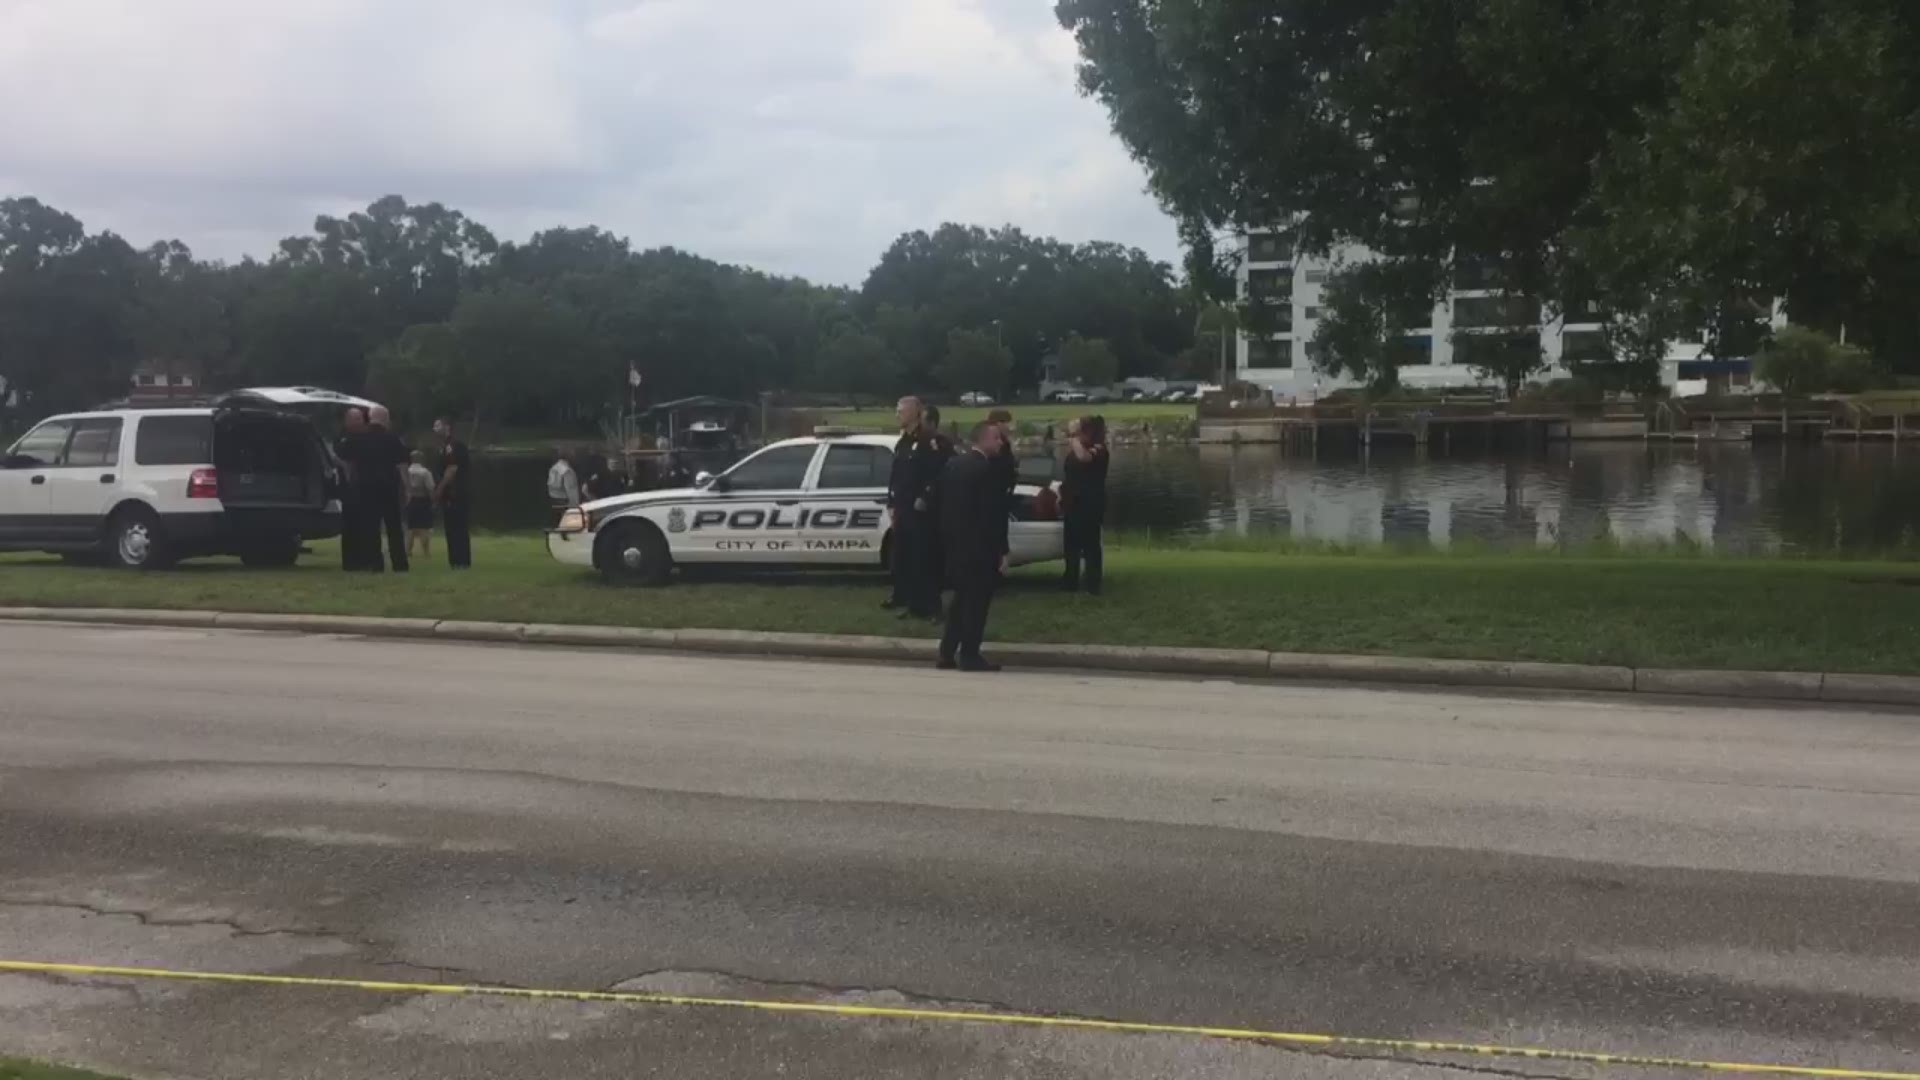 A young child has died after being found unconscious in the Hillsborough River. Police say a woman believed to be the child's mother dumped her into the river. That woman is in custody.